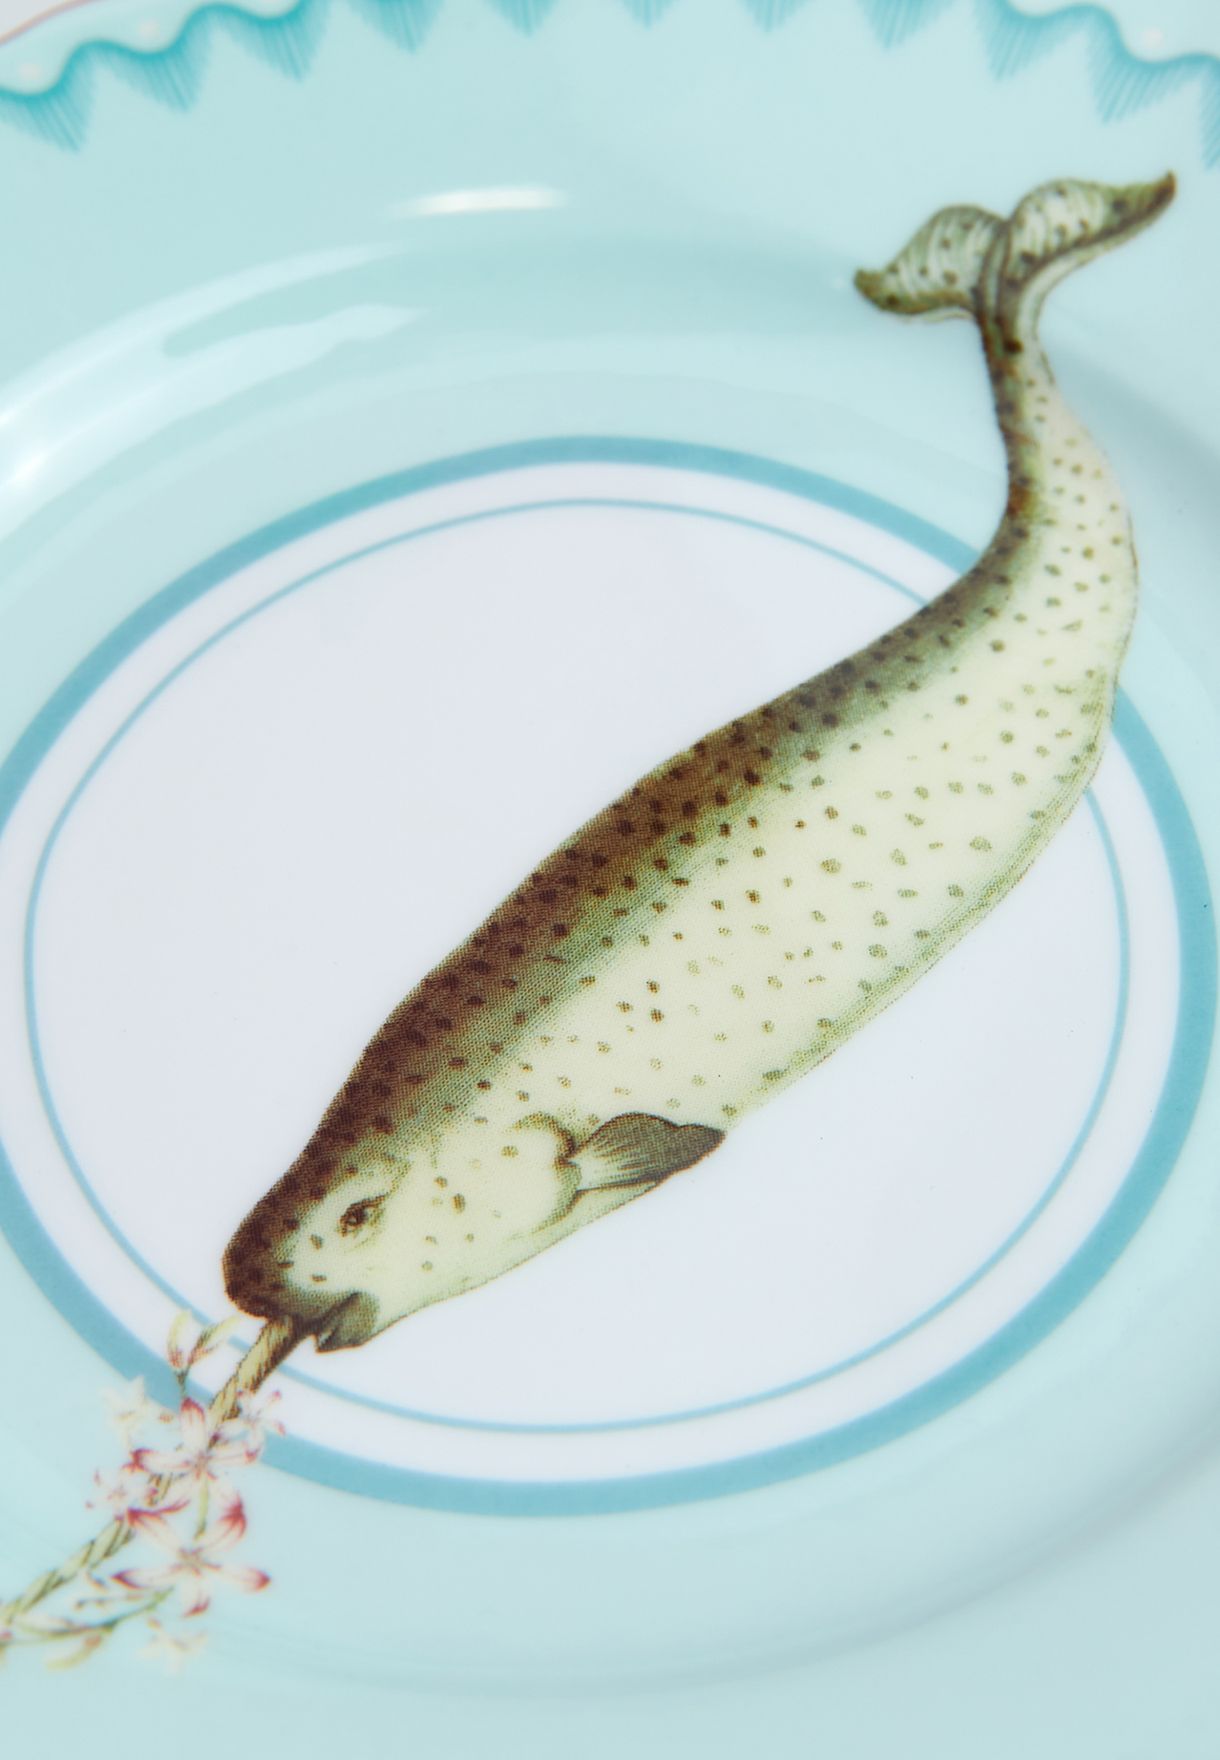 Narwhal Cake Plate